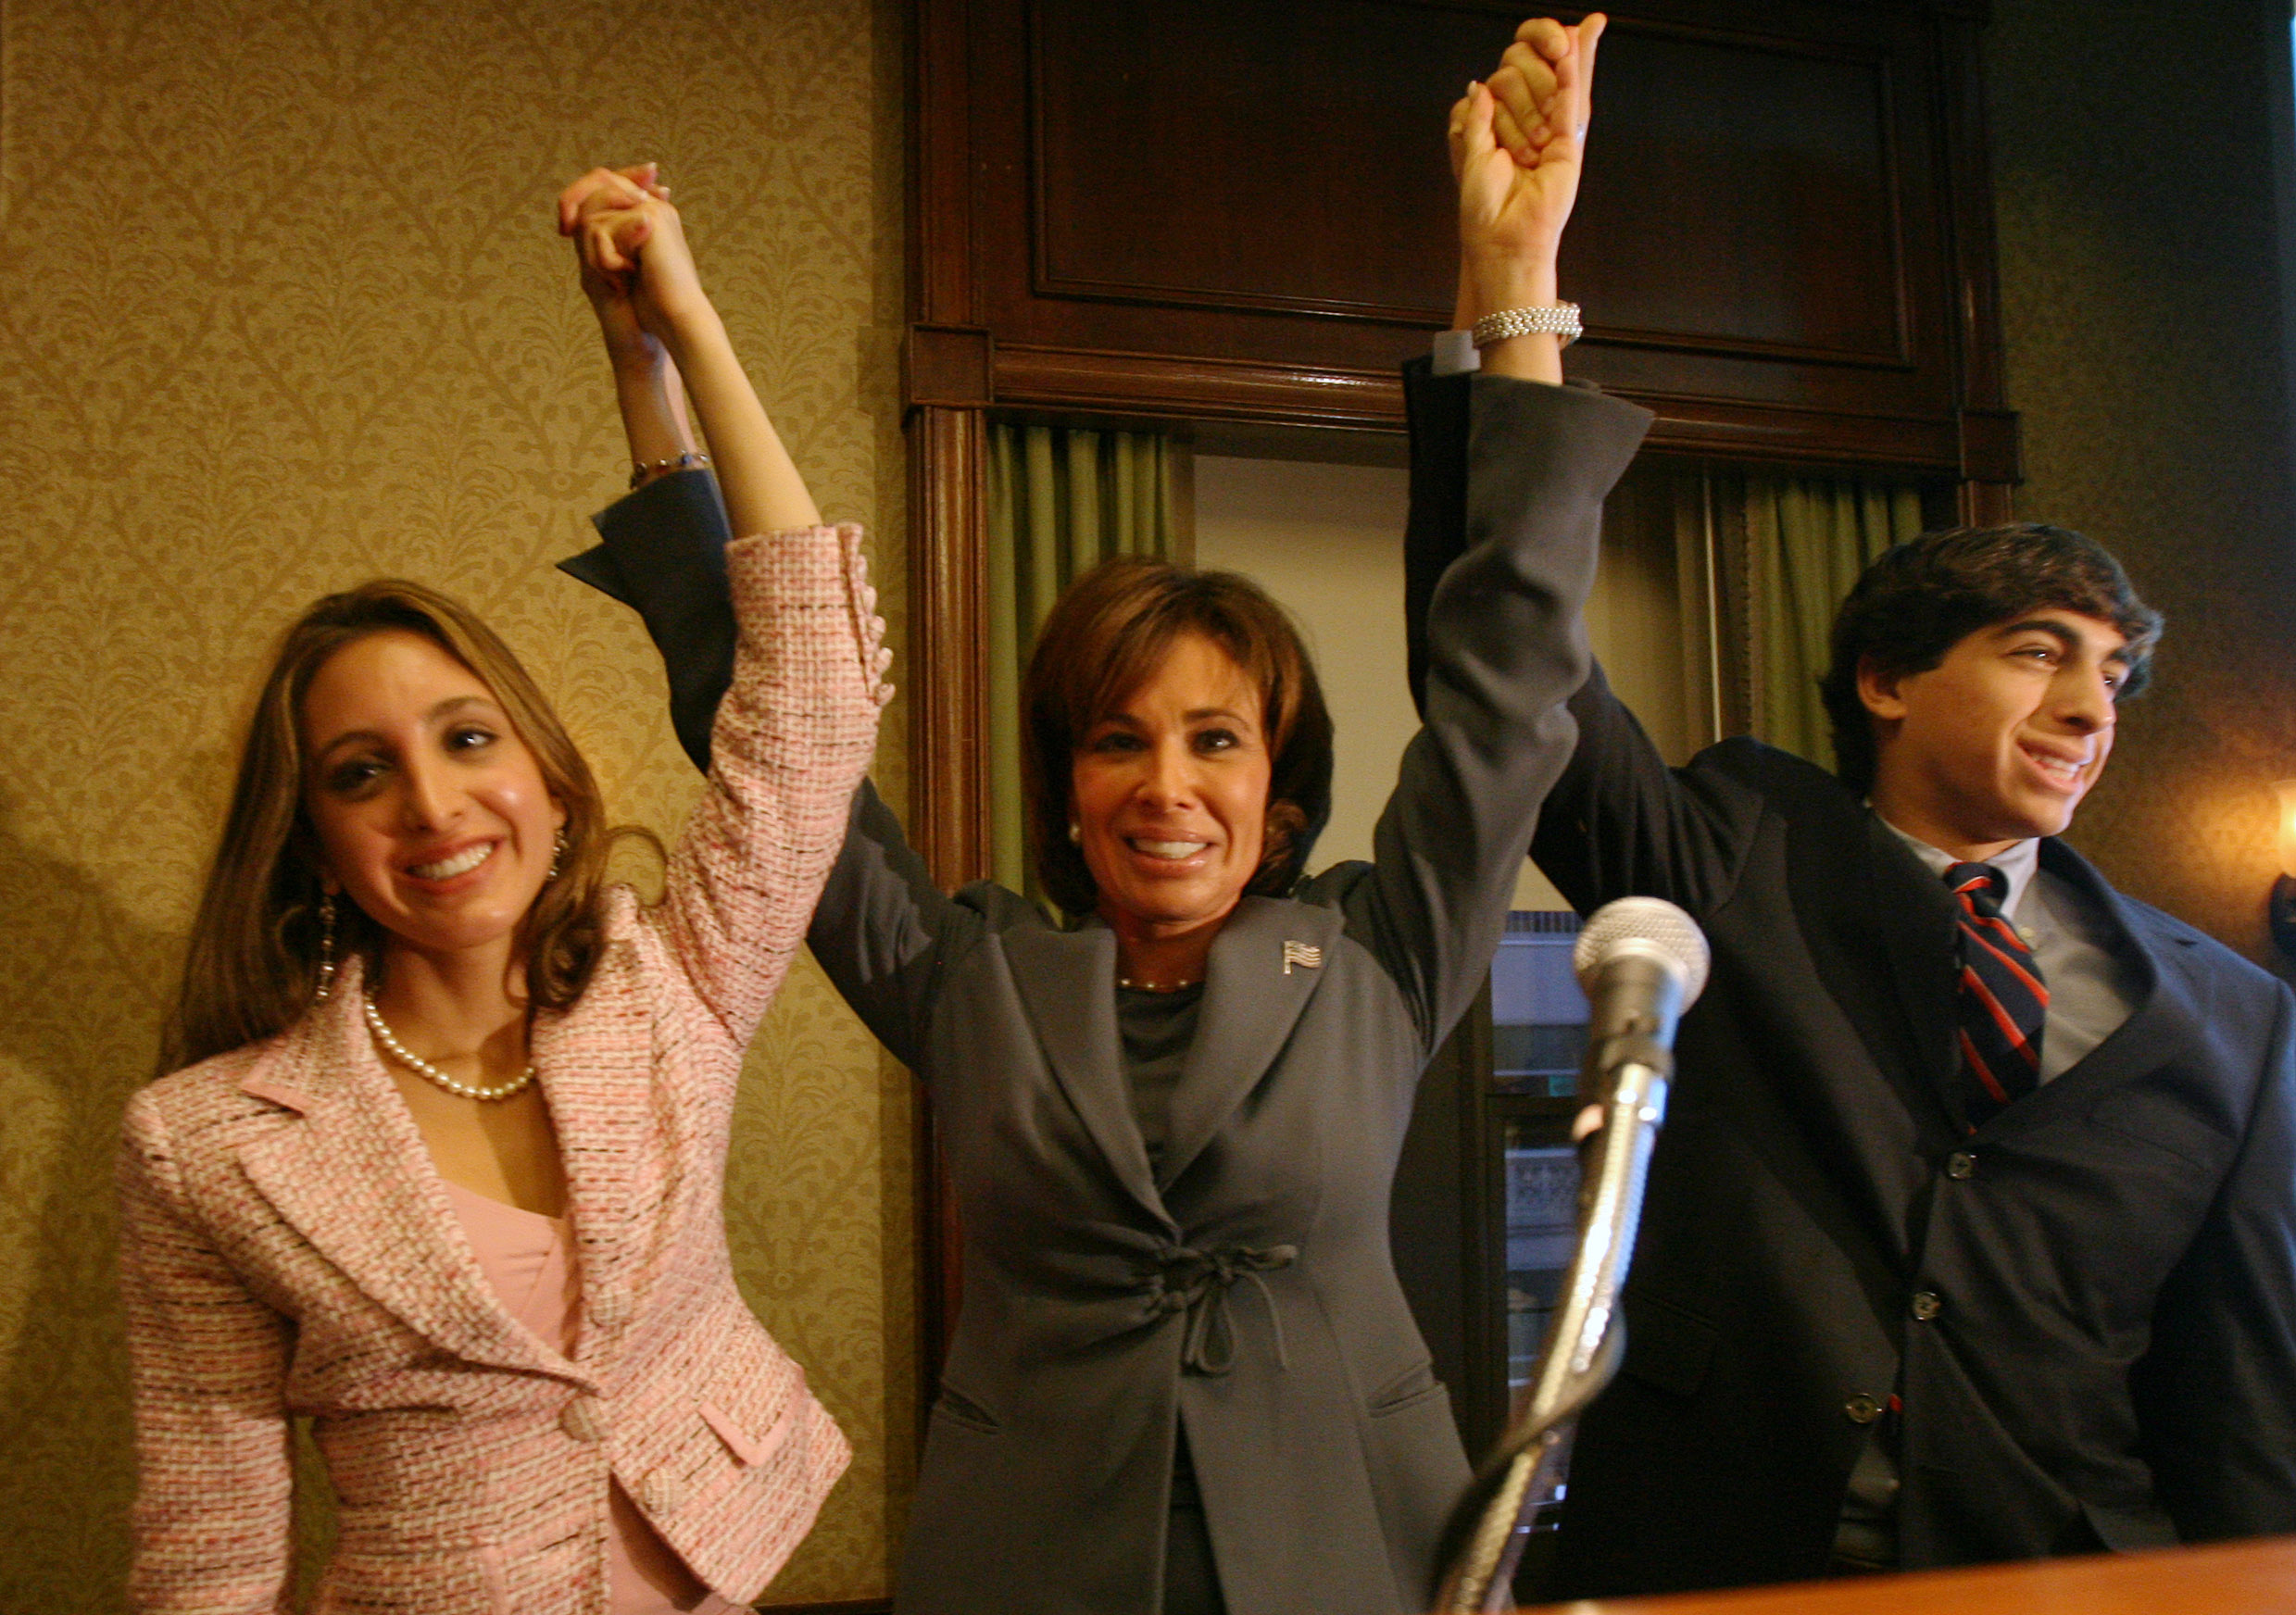 Jeanine Pirro,  center, with her daughter Cristine, 21, left, and her son Alex, 17, right, at a fundraiser for her campaign, Tuesday, October 3, 2006, in New York. | Source: Getty Images